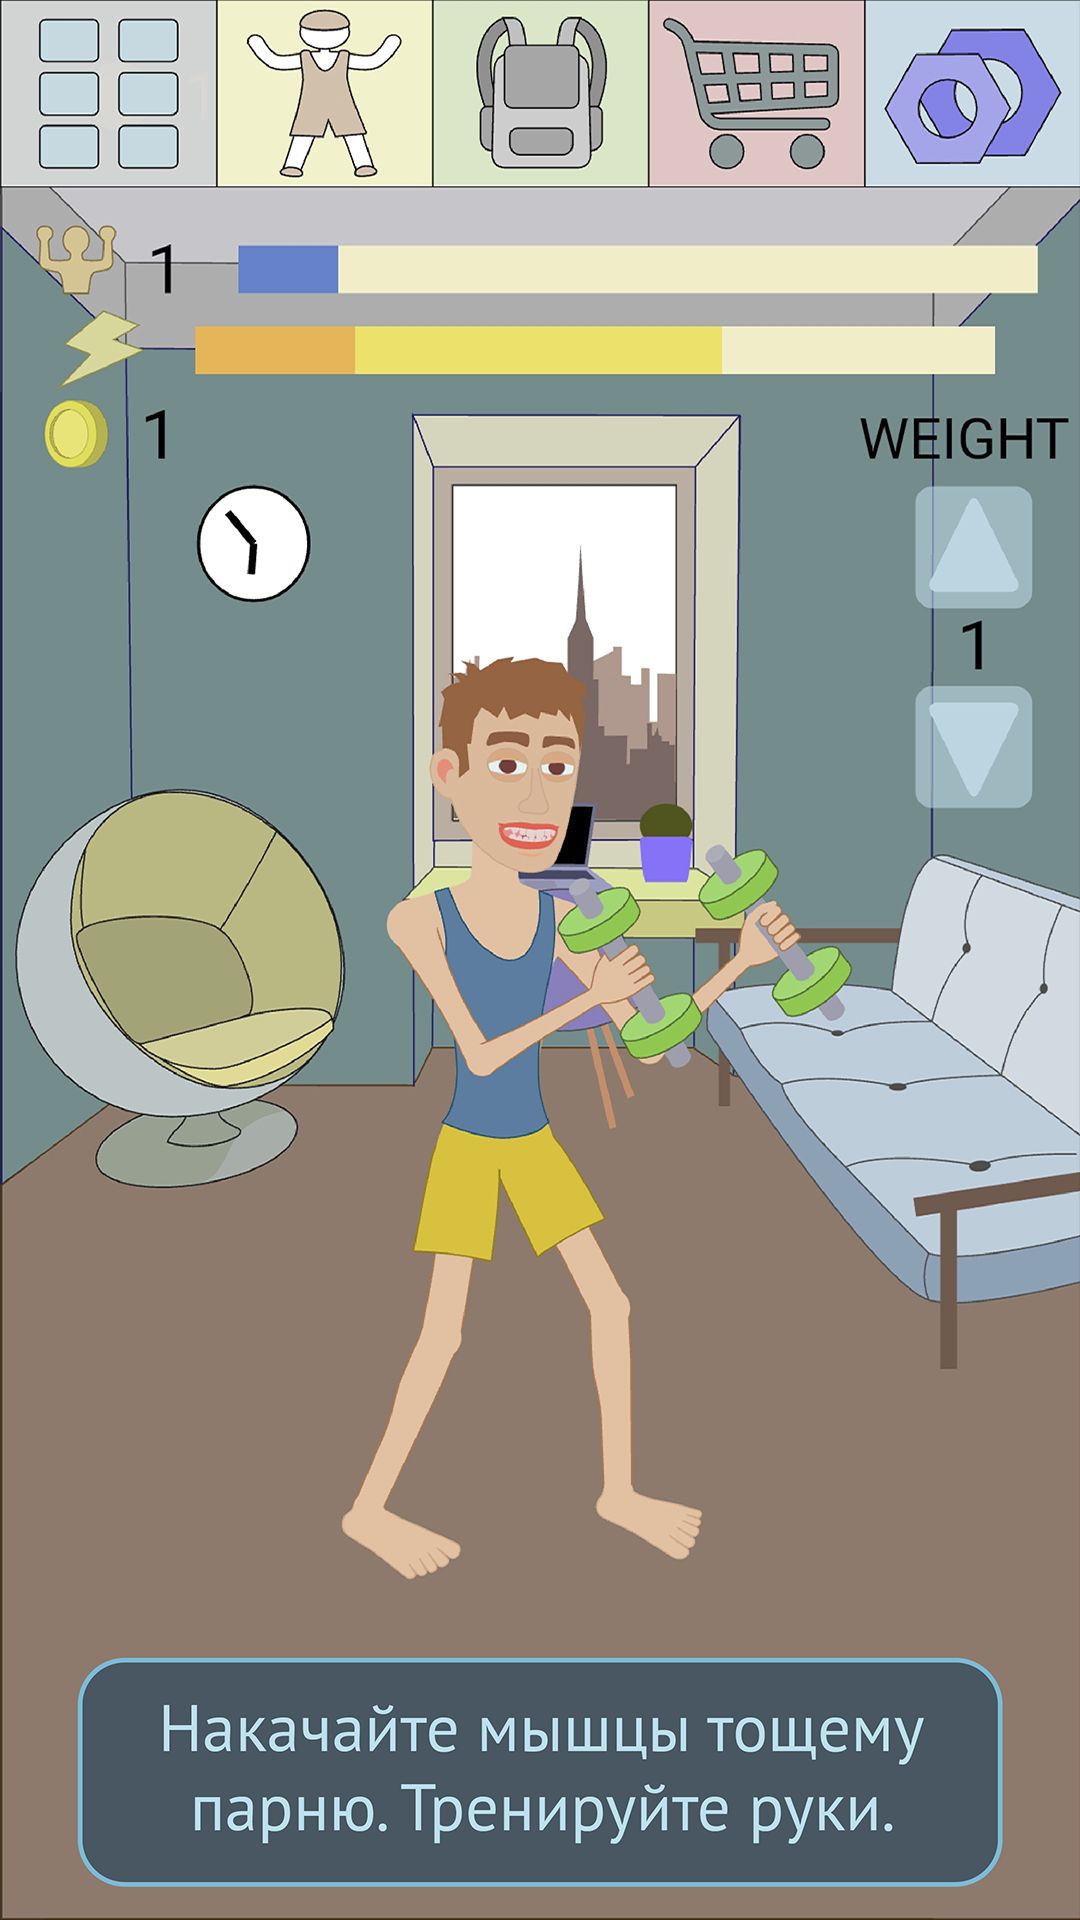 Full version of Android Clicker game apk Muscle clicker 2: RPG Gym game for tablet and phone.